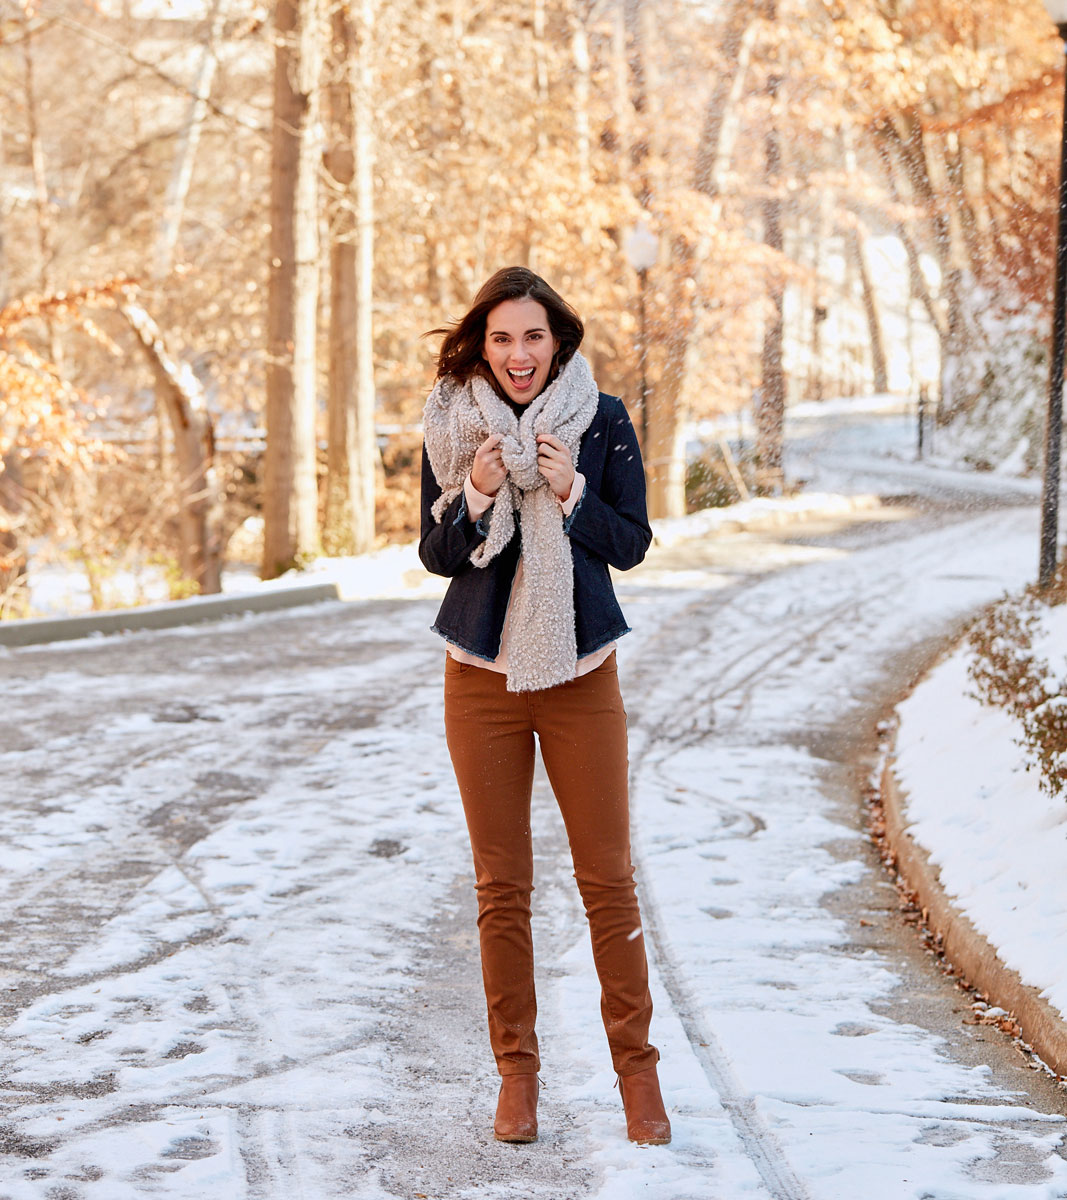 Model standing in snowy road photographed by professional commercial clothing photographer Kate Benson.